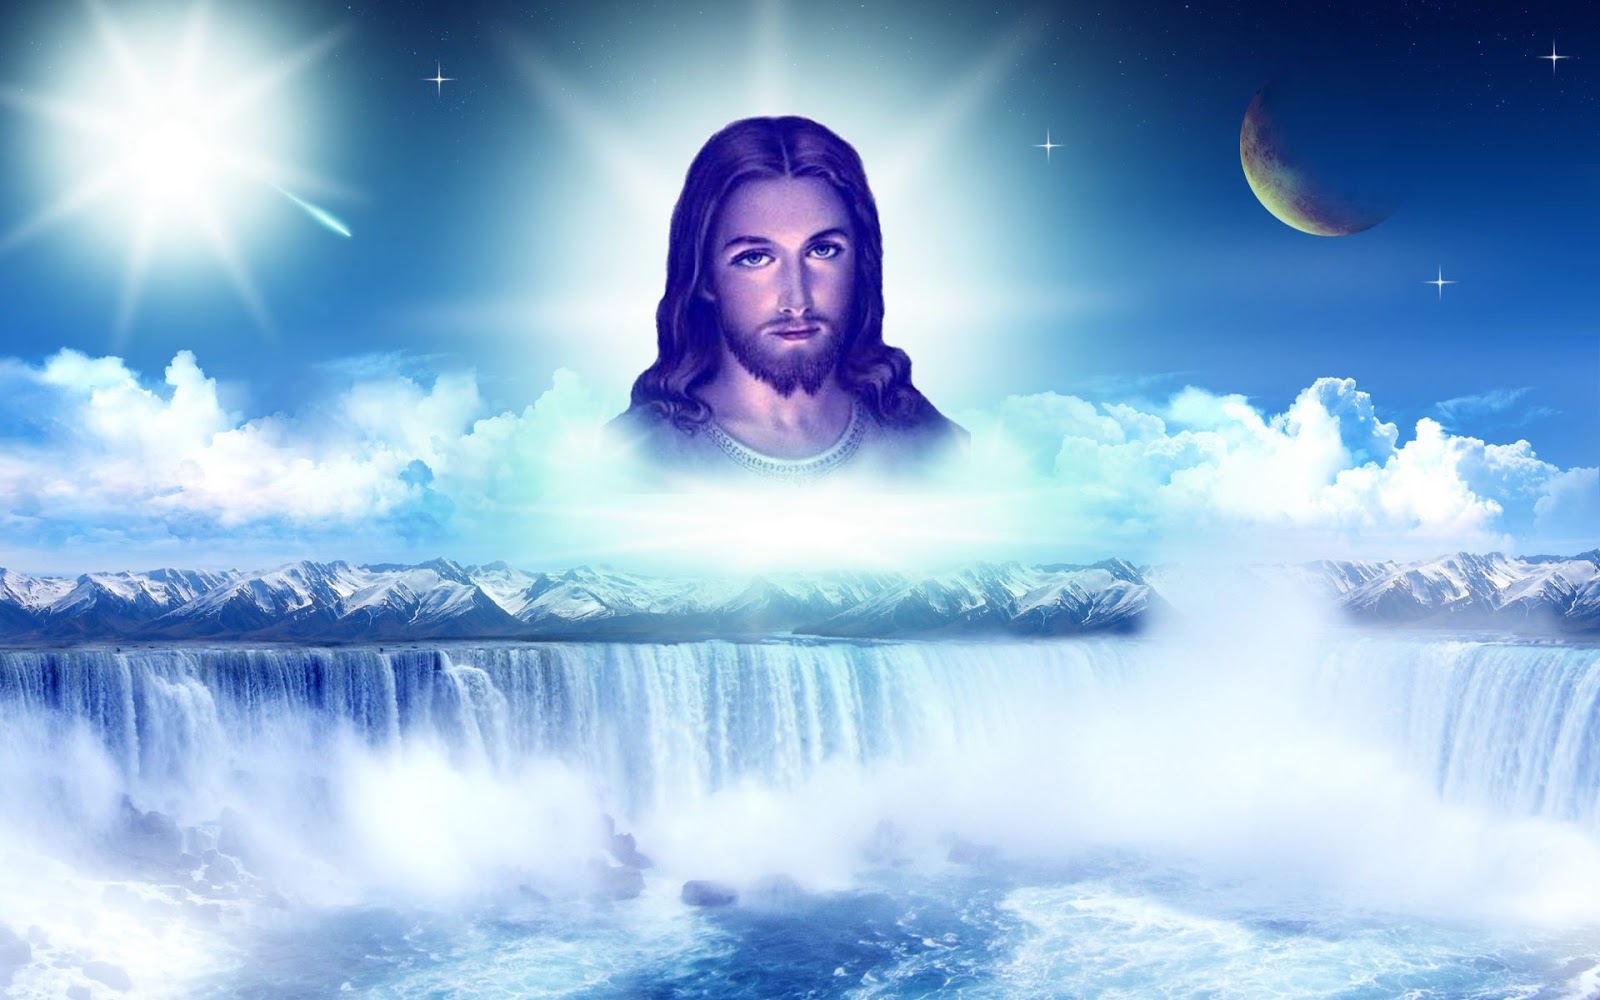 Download Free High-Quality 4K Collection of 999+ Jesus Images in HD 3D